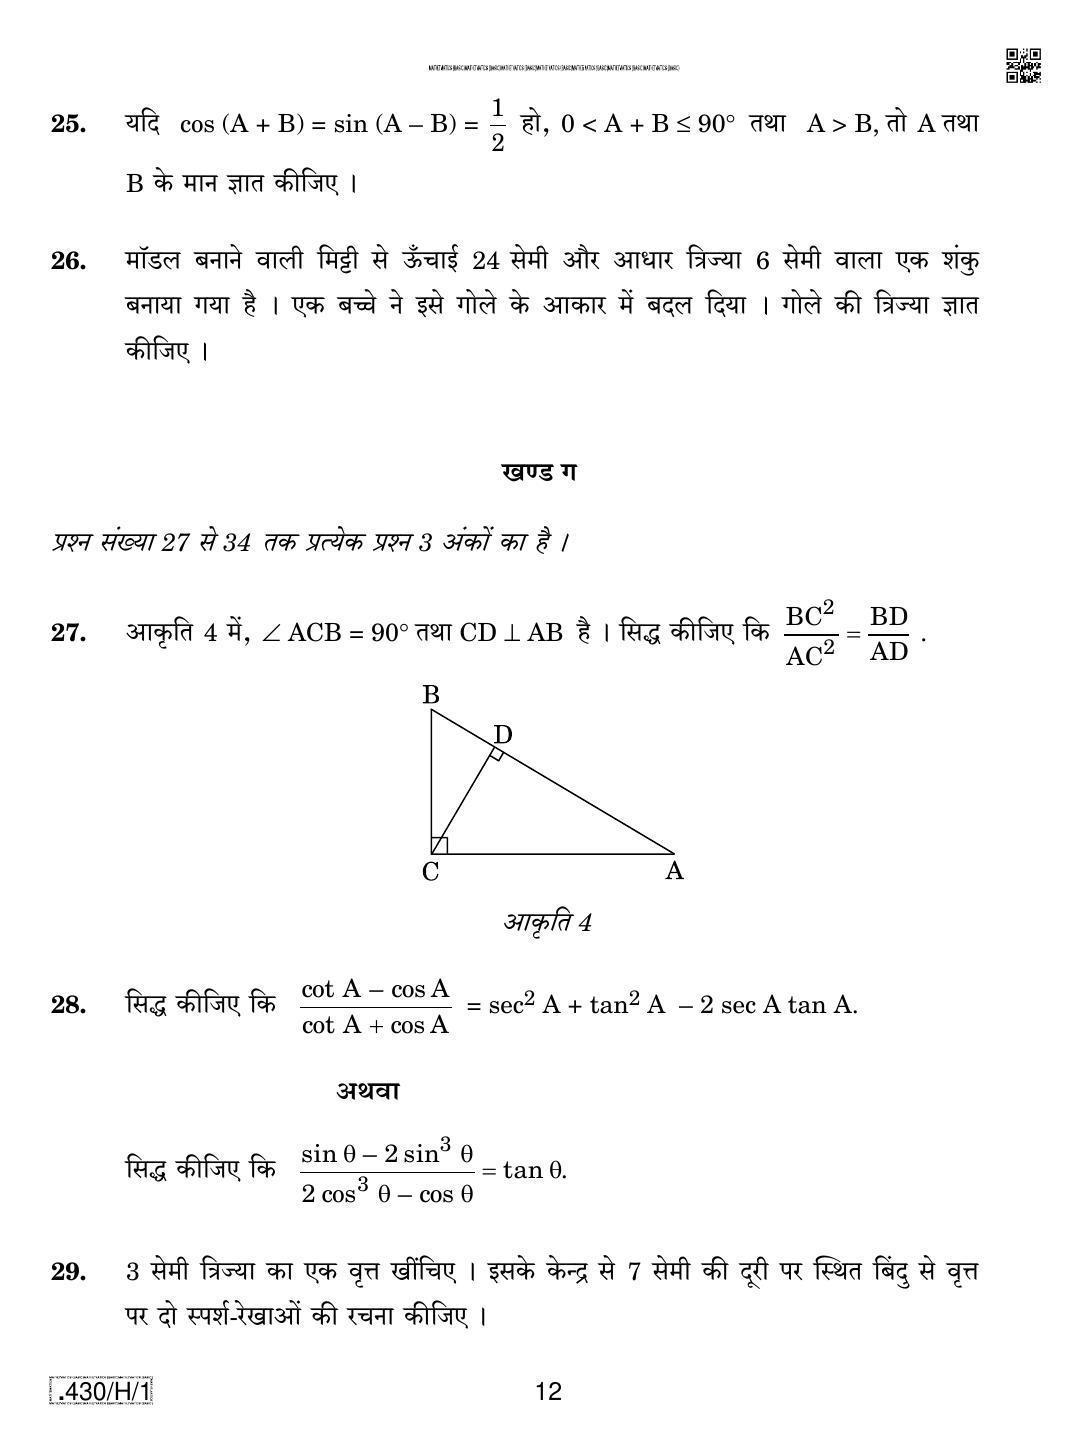 CBSE Class 10 430-C-1 - Maths (Basic) 2020 Compartment Question Paper - Page 12